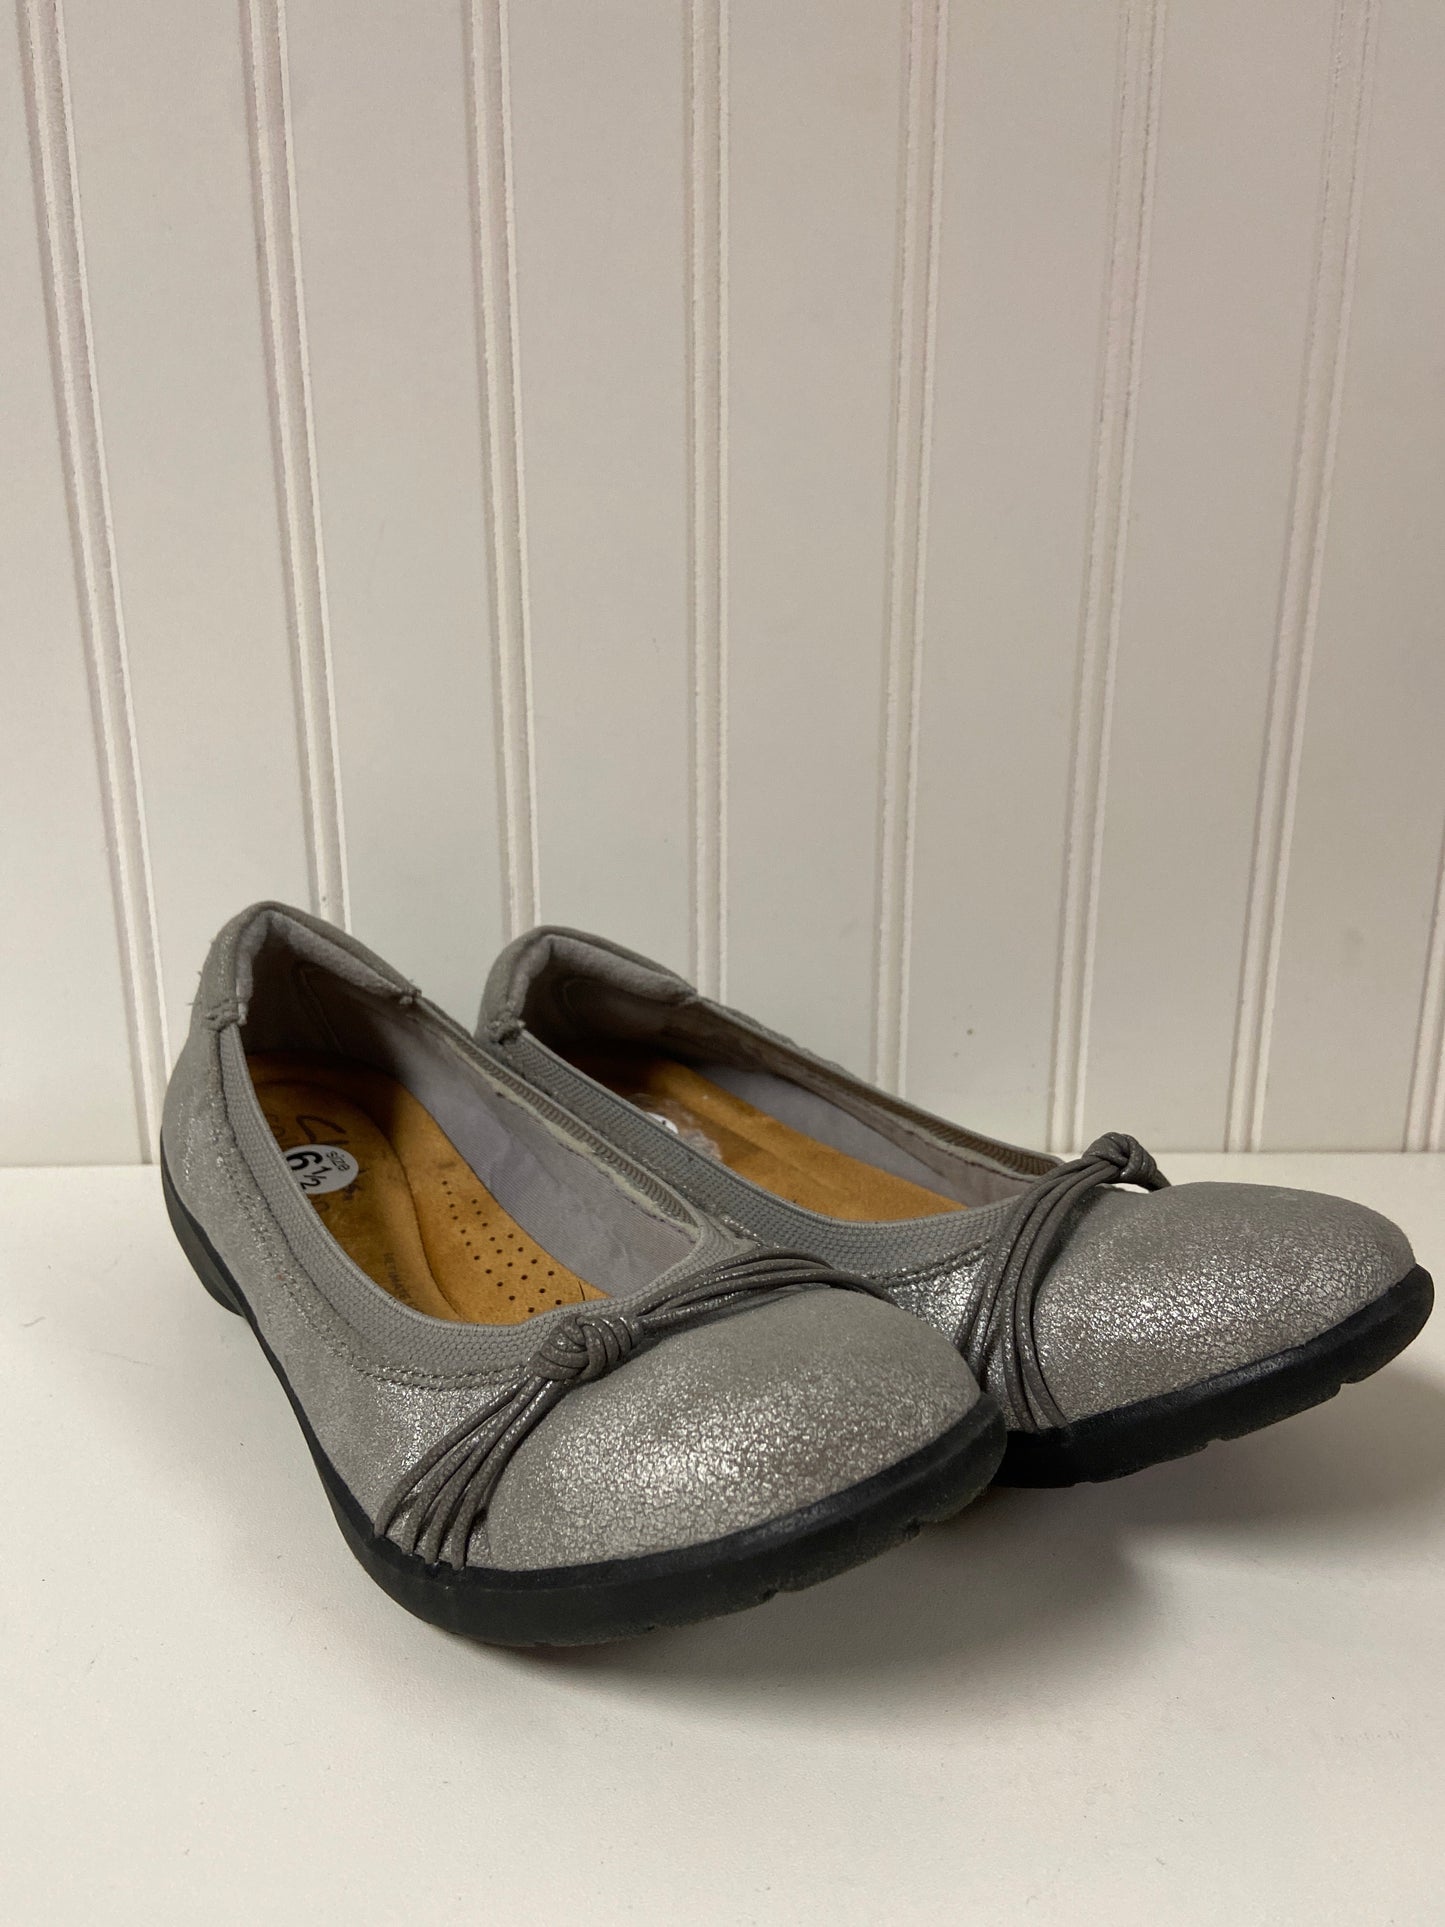 Silver Shoes Flats Clarks, Size 6.5